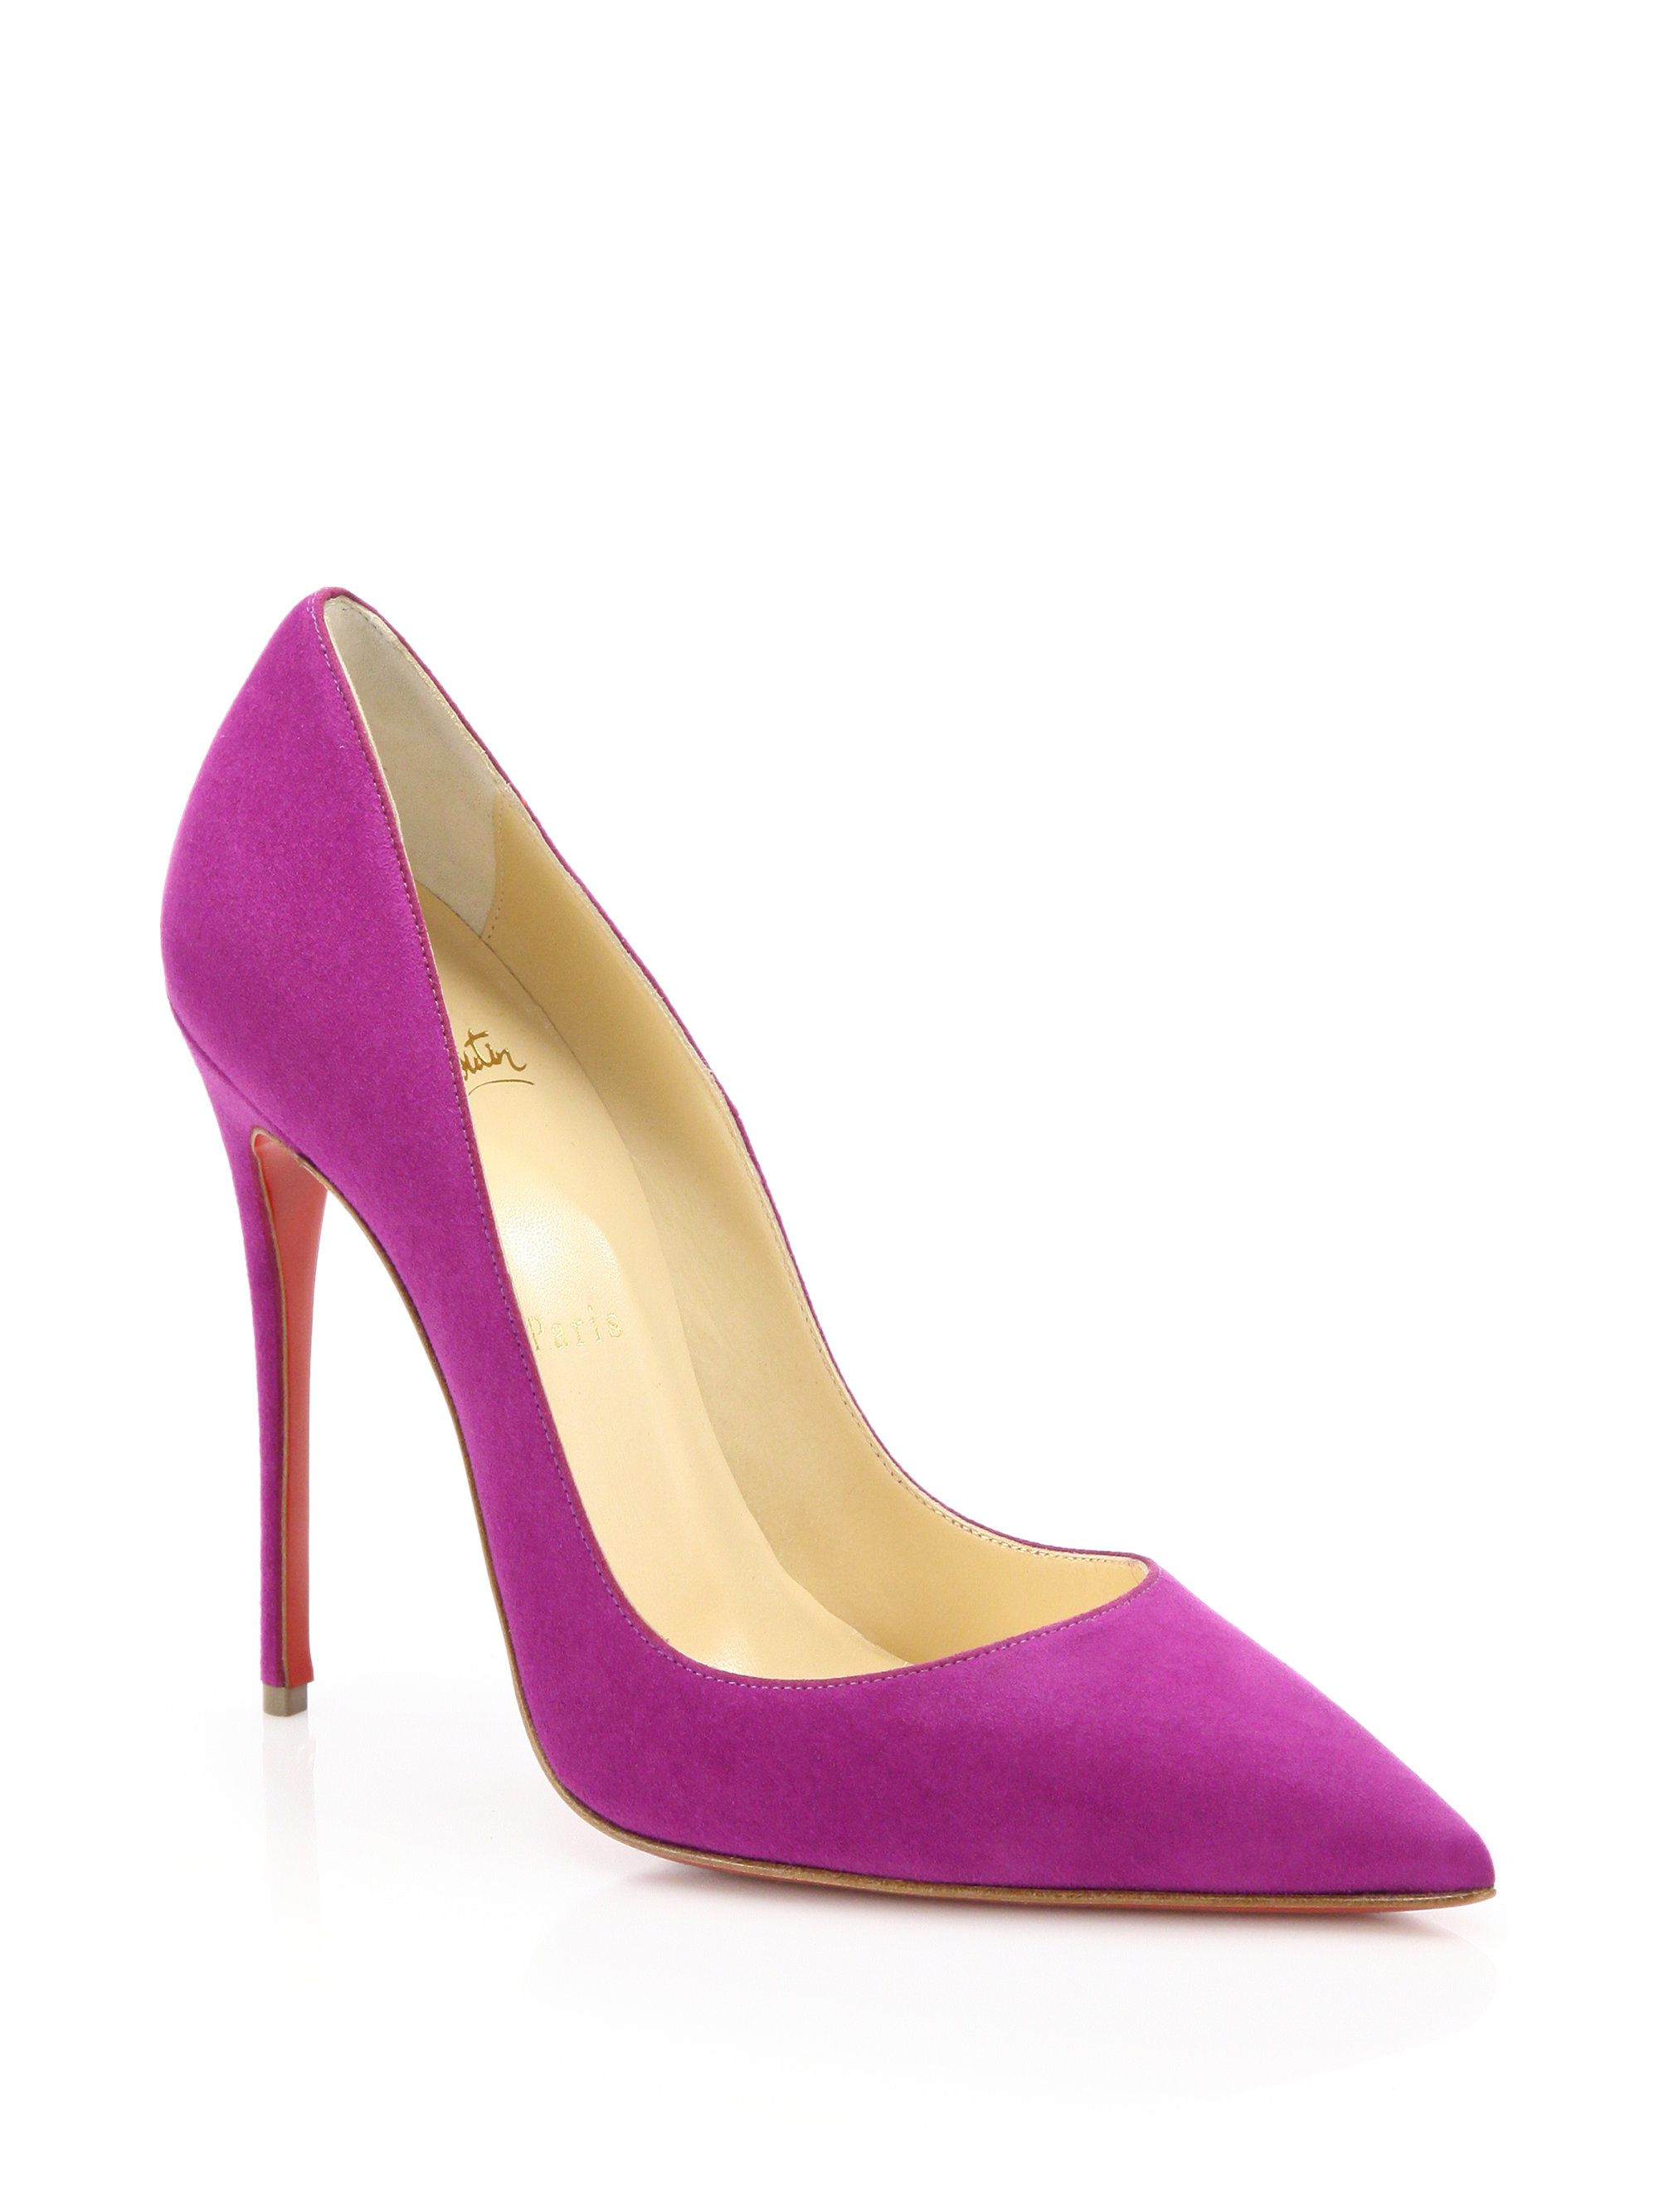 Christian louboutin So Kate Suede Pumps in Pink | Lyst  